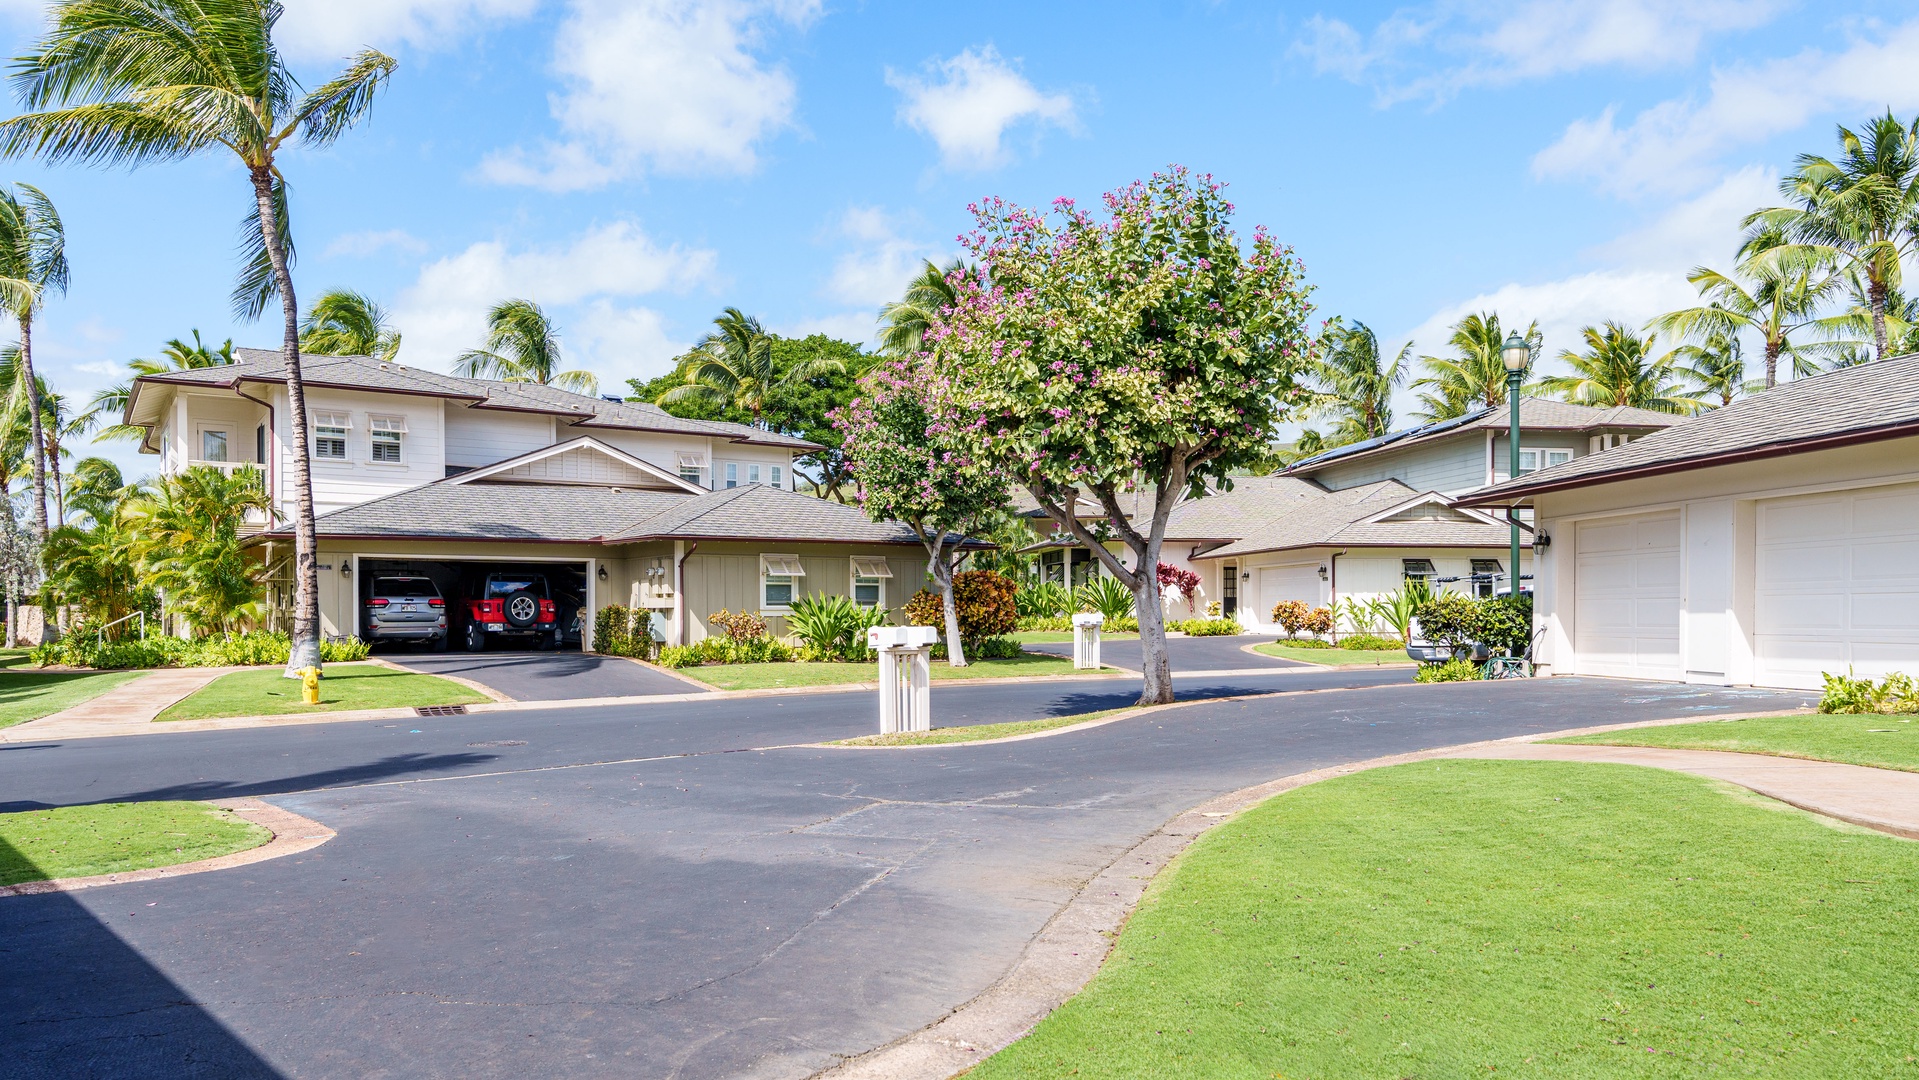 Kapolei Vacation Rentals, Coconut Plantation 1078-1 - Welcome home!